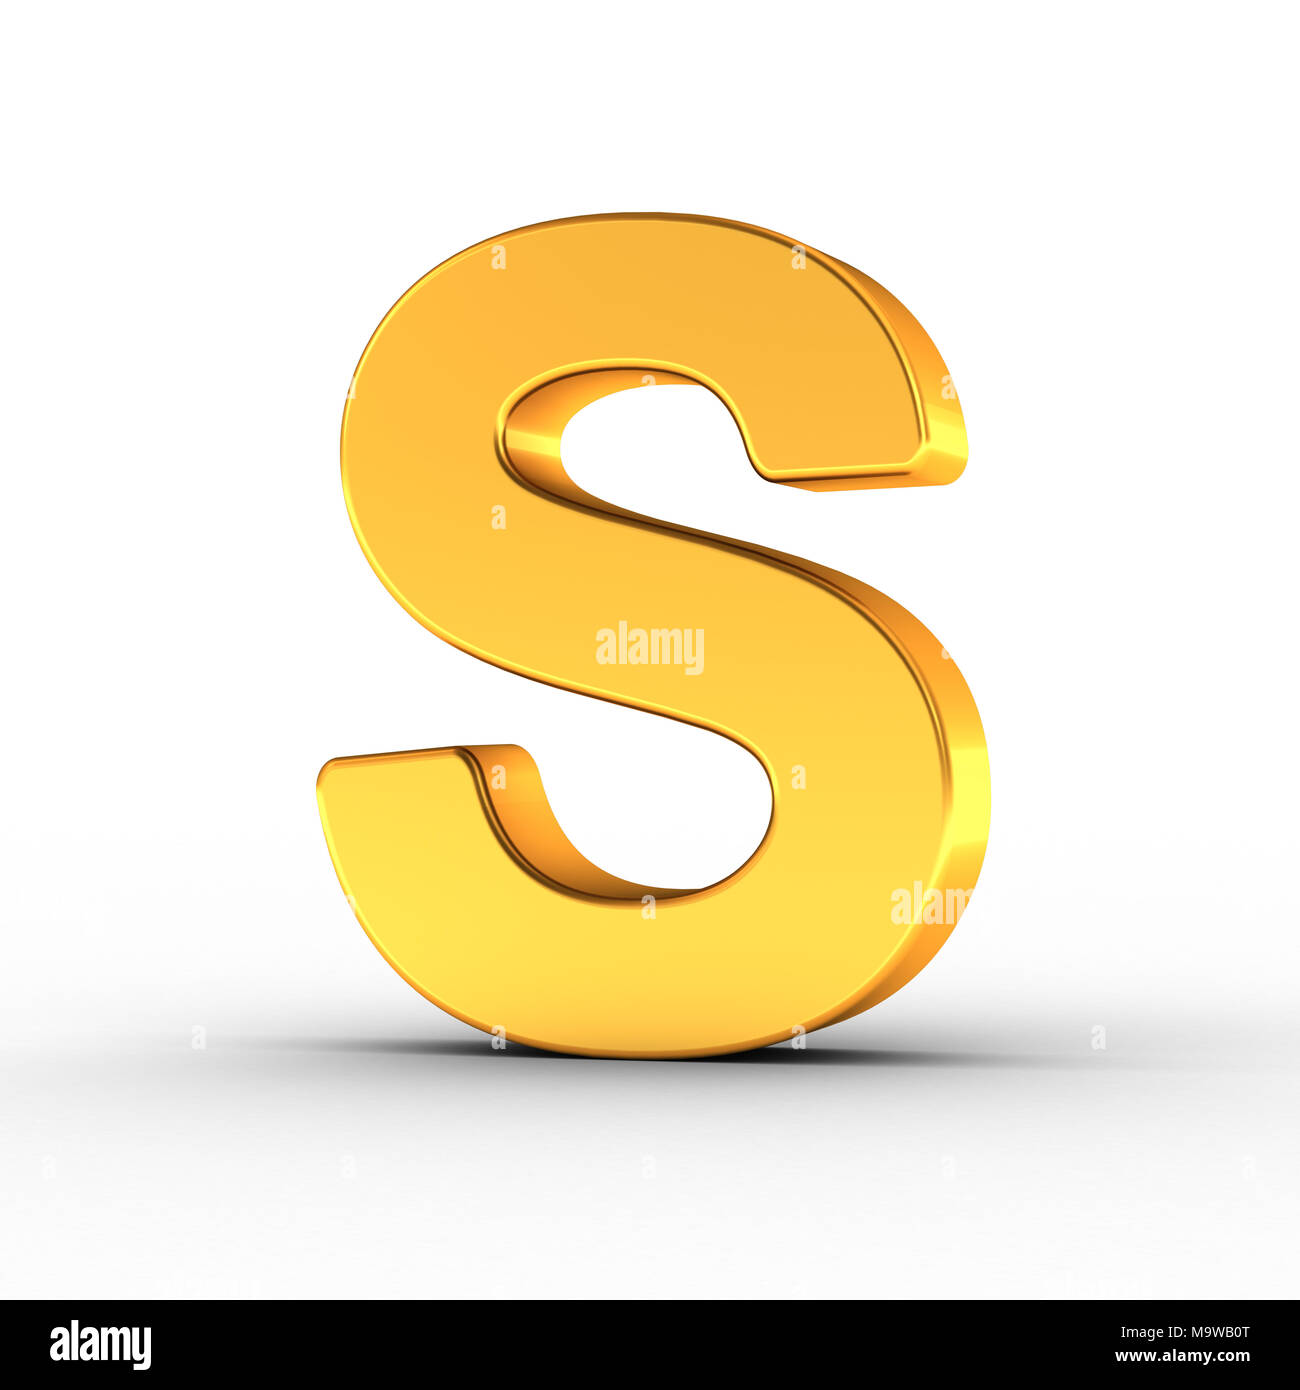 The Letter S as a polished golden object over white background with clipping path for quick and accurate isolation. Stock Photo